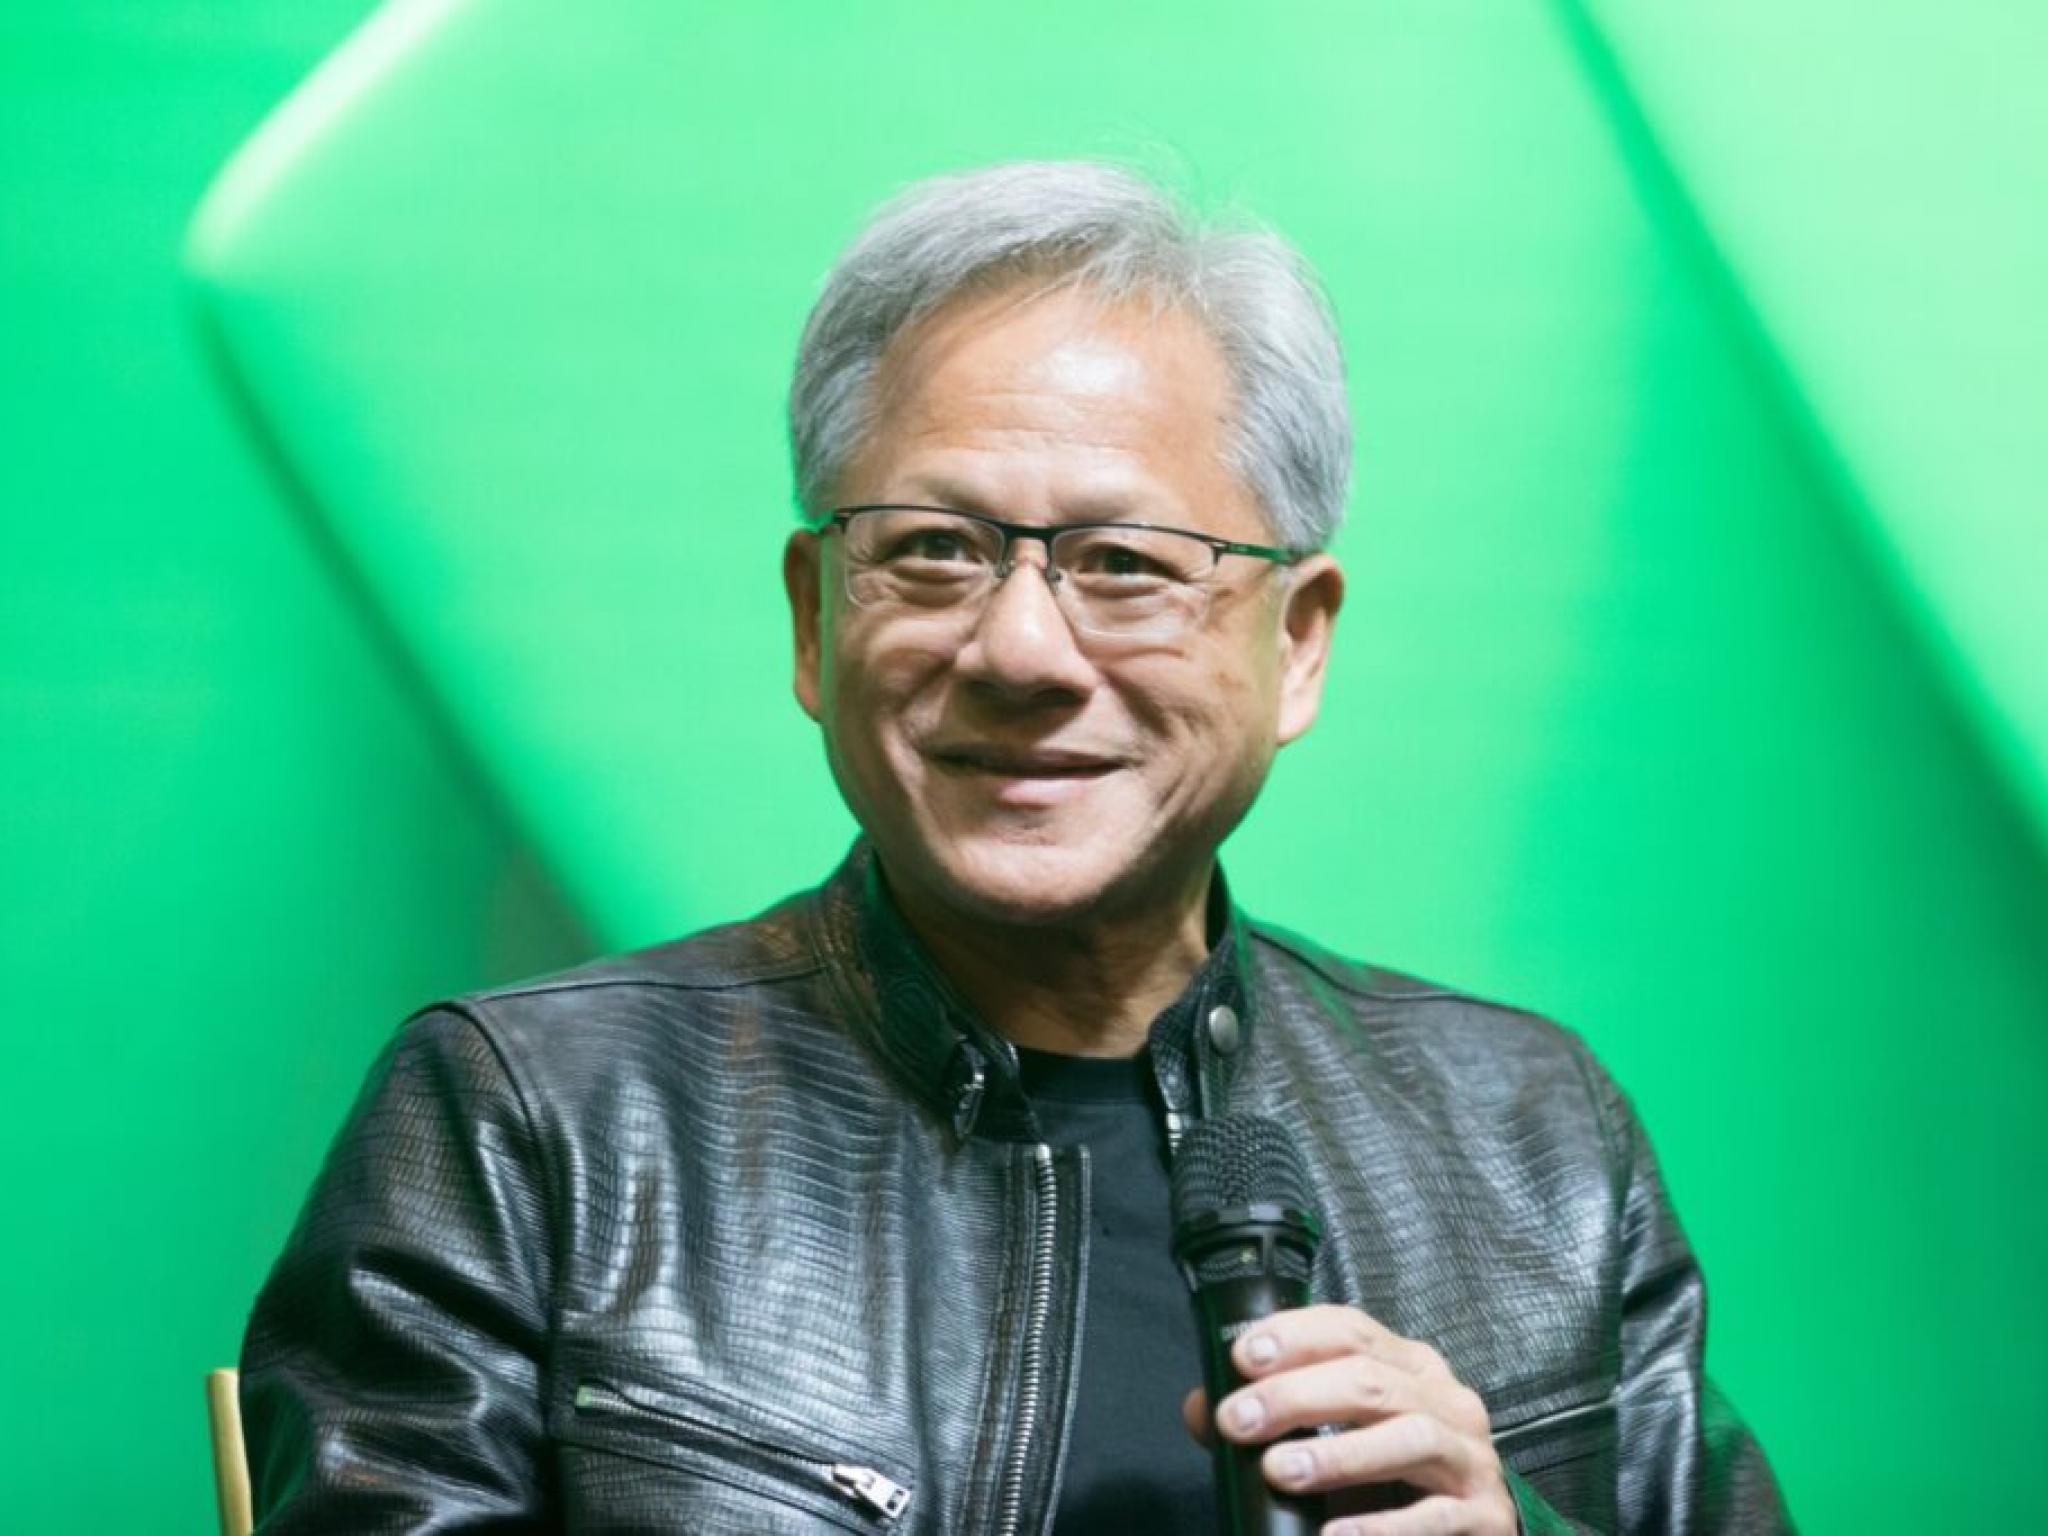  nvidia-ceo-jensen-huang-recalls-billions-of-dollars-of-investments-in-deep-learning-and-the-philosophy-behind-it-if-we-dont-build-it-they-cant-come 